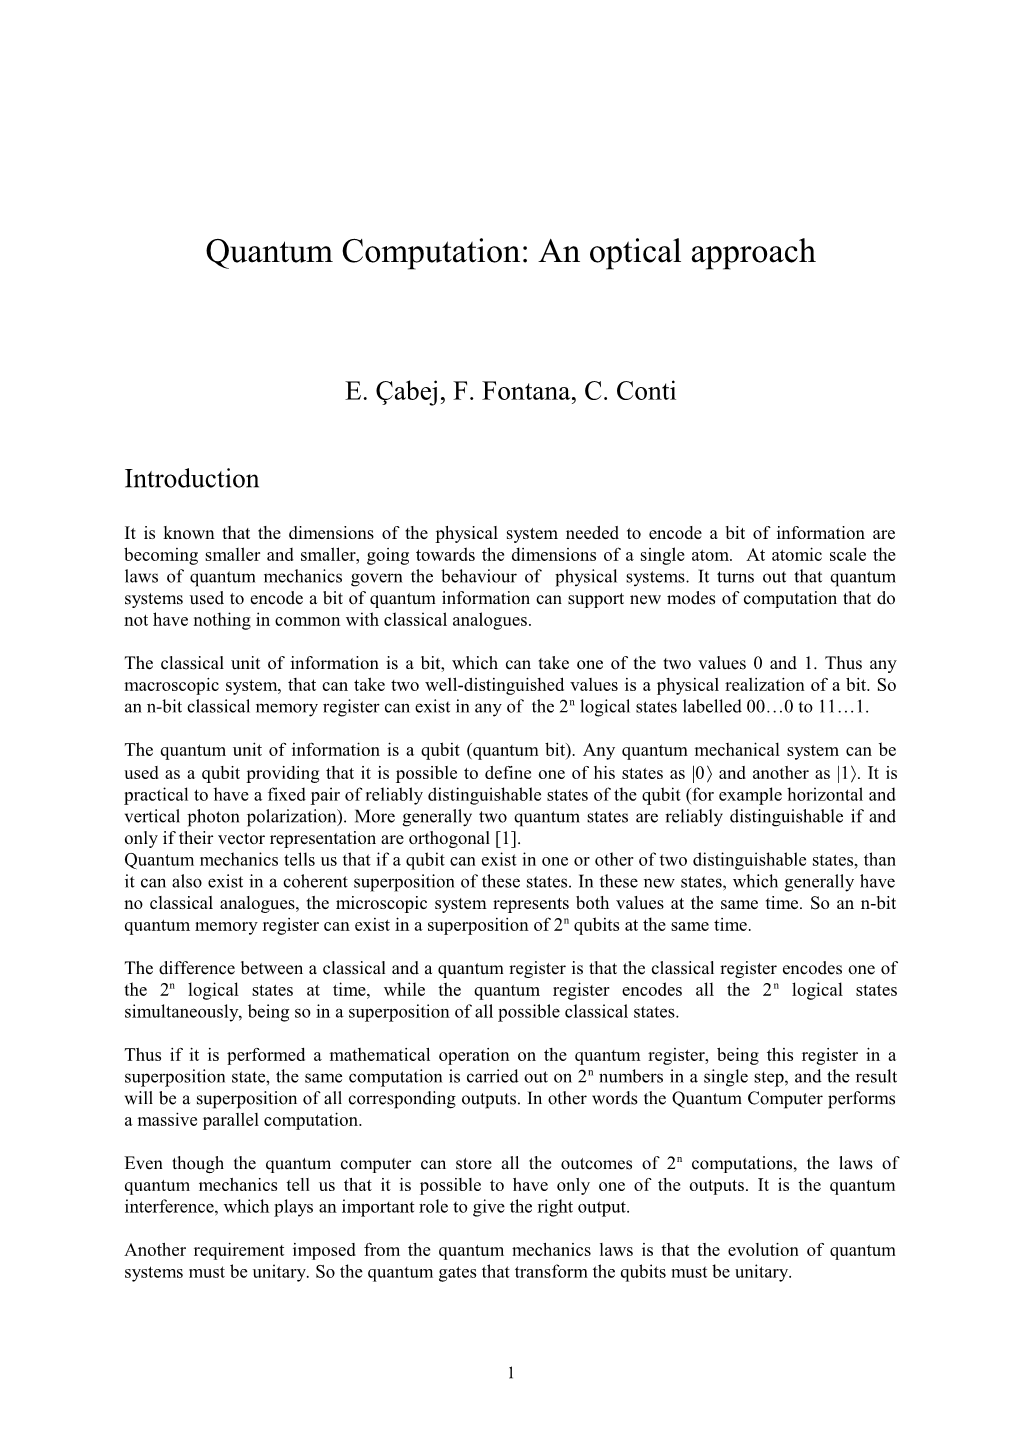 It Is Natural to Think of Quantum Computations As Multiparticle Process (Just As Classical